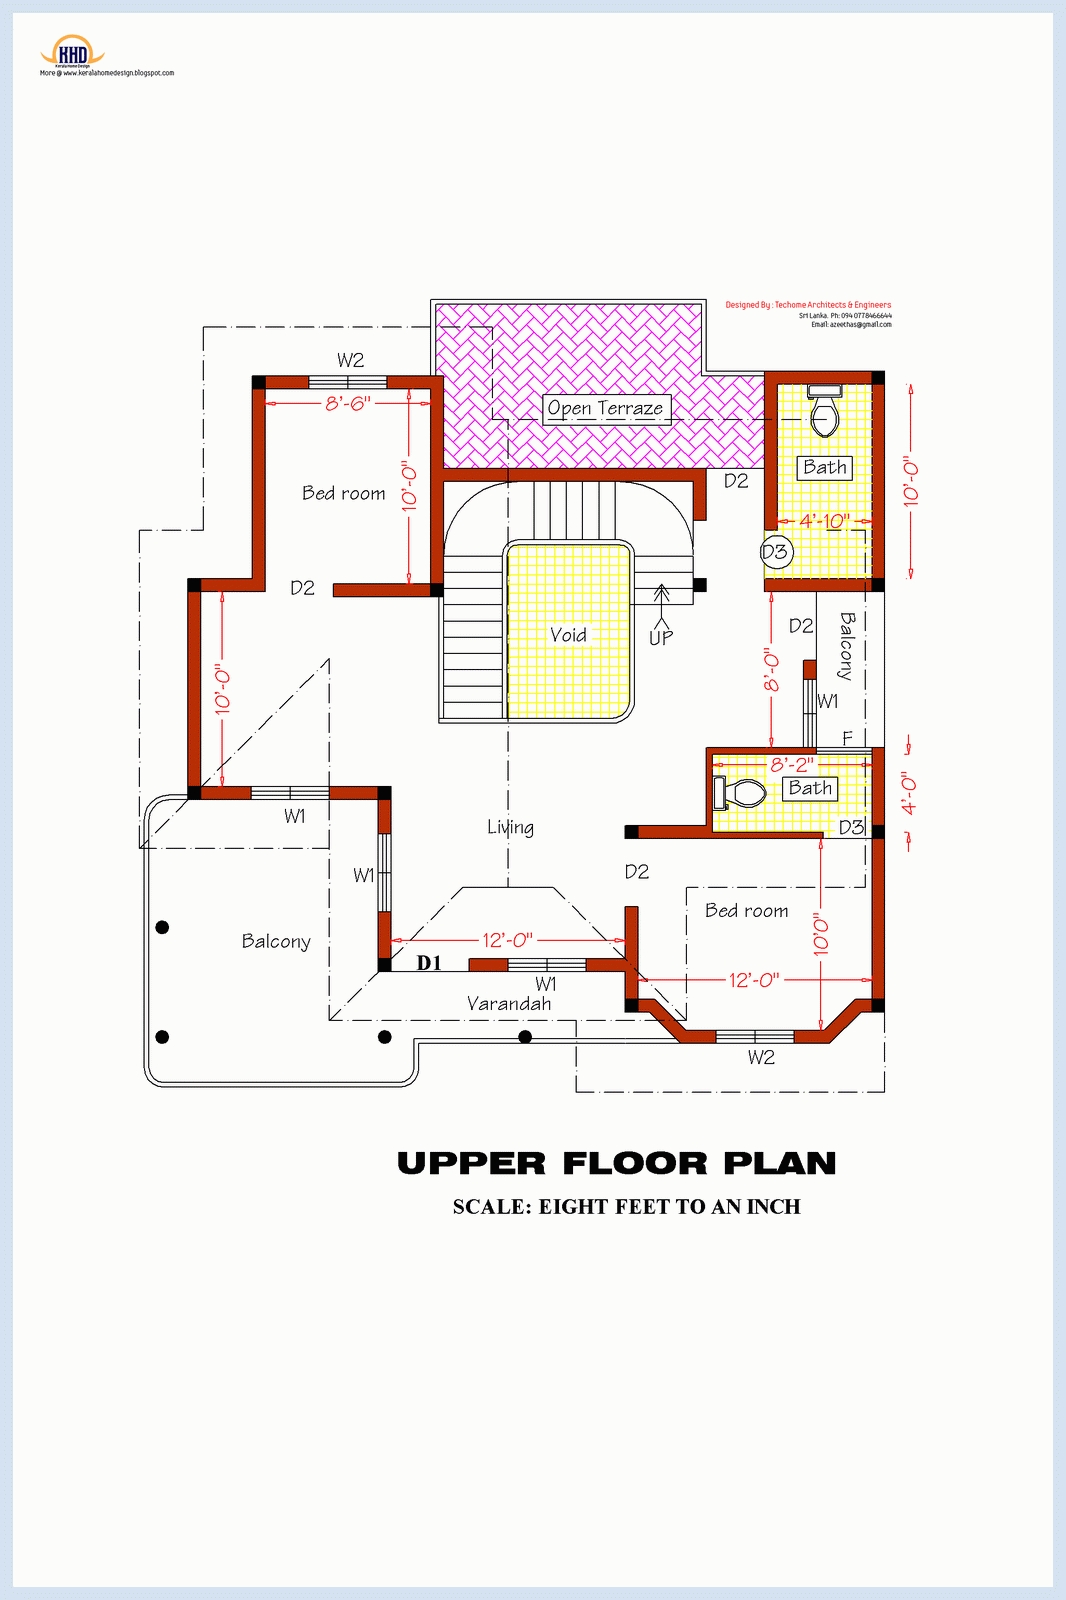 Exquisite 3 bedroom home plan and elevation | house design plans with 3 bed room home pplan single floor